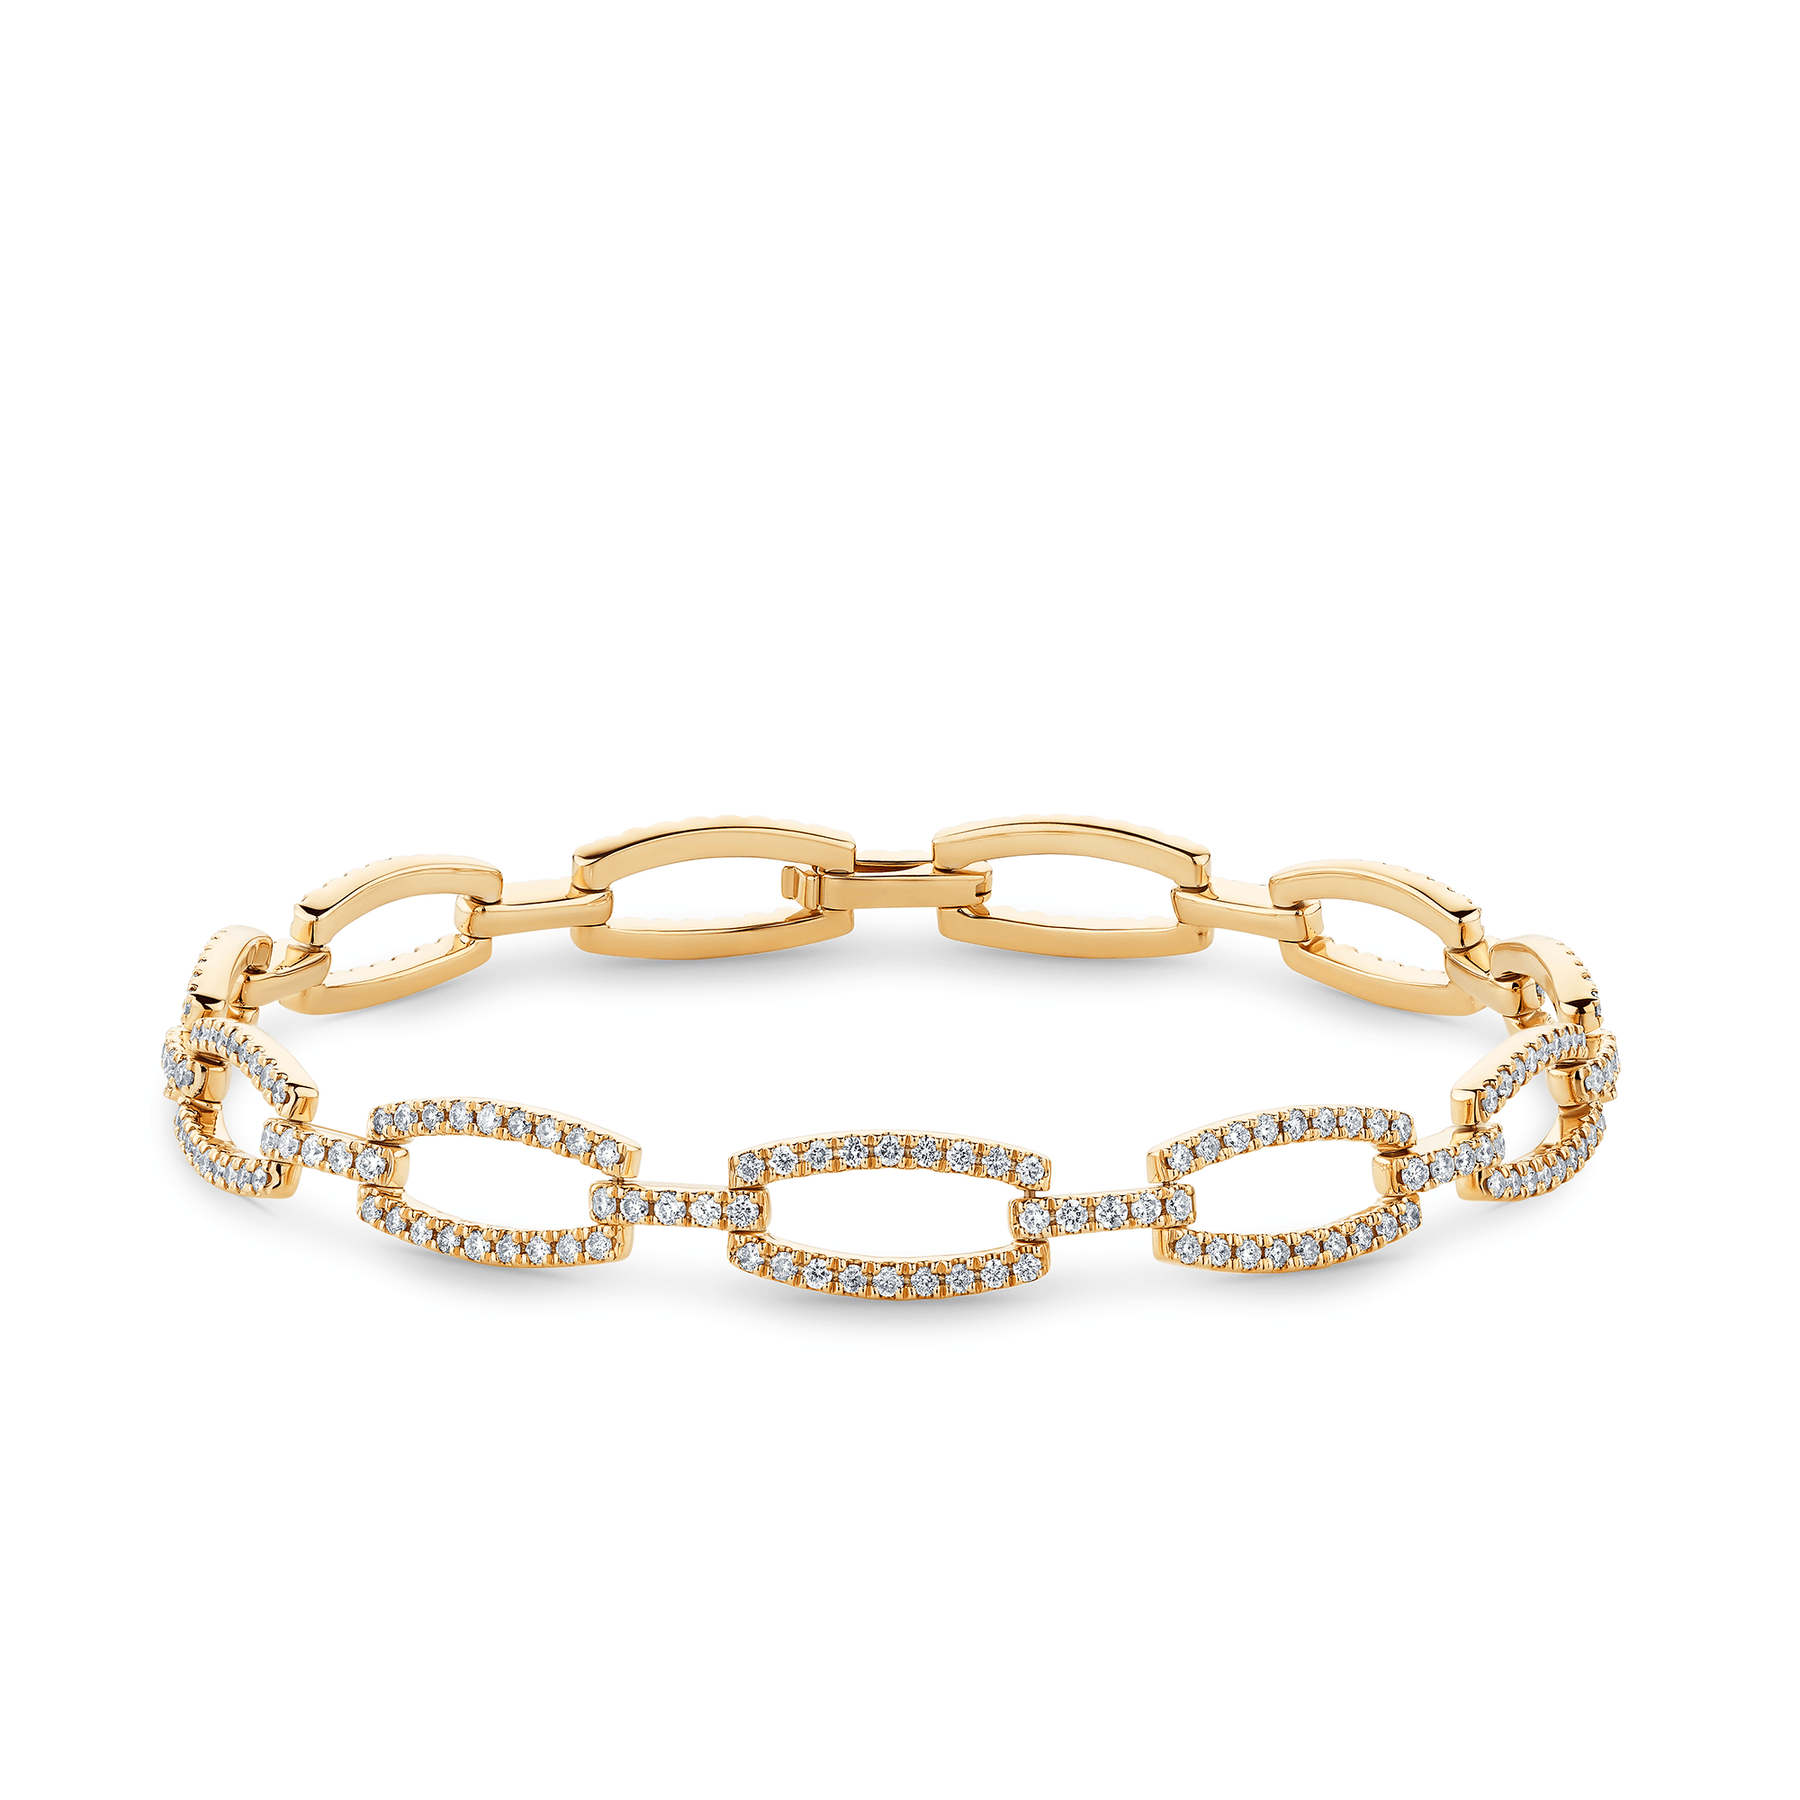 2ct TW Diamond Link Bracelet in 9ct Yellow Gold - Wallace Bishop